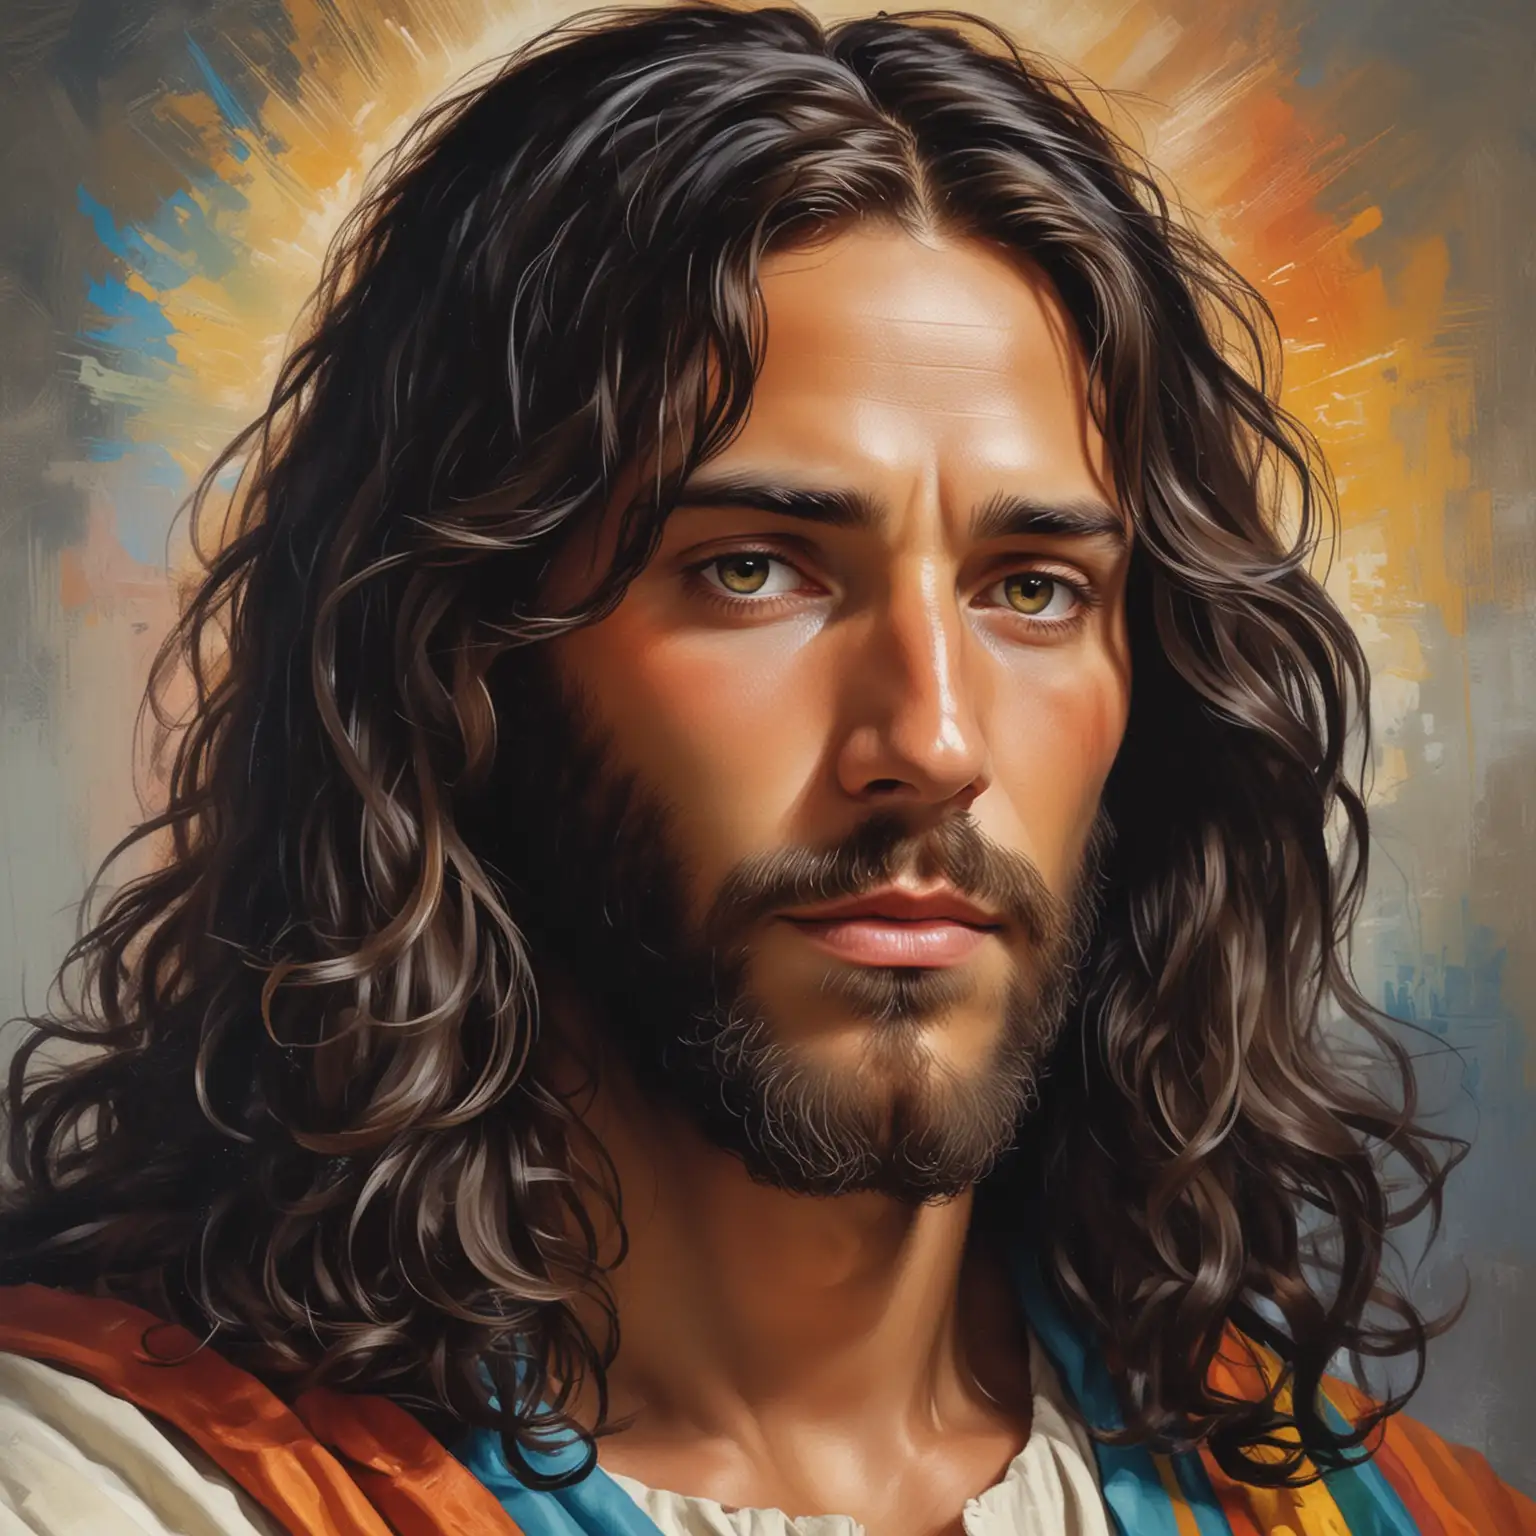 JESUS WITH LONG, DARK WAVY HAIR, head and shoulders painting. colorful portrait